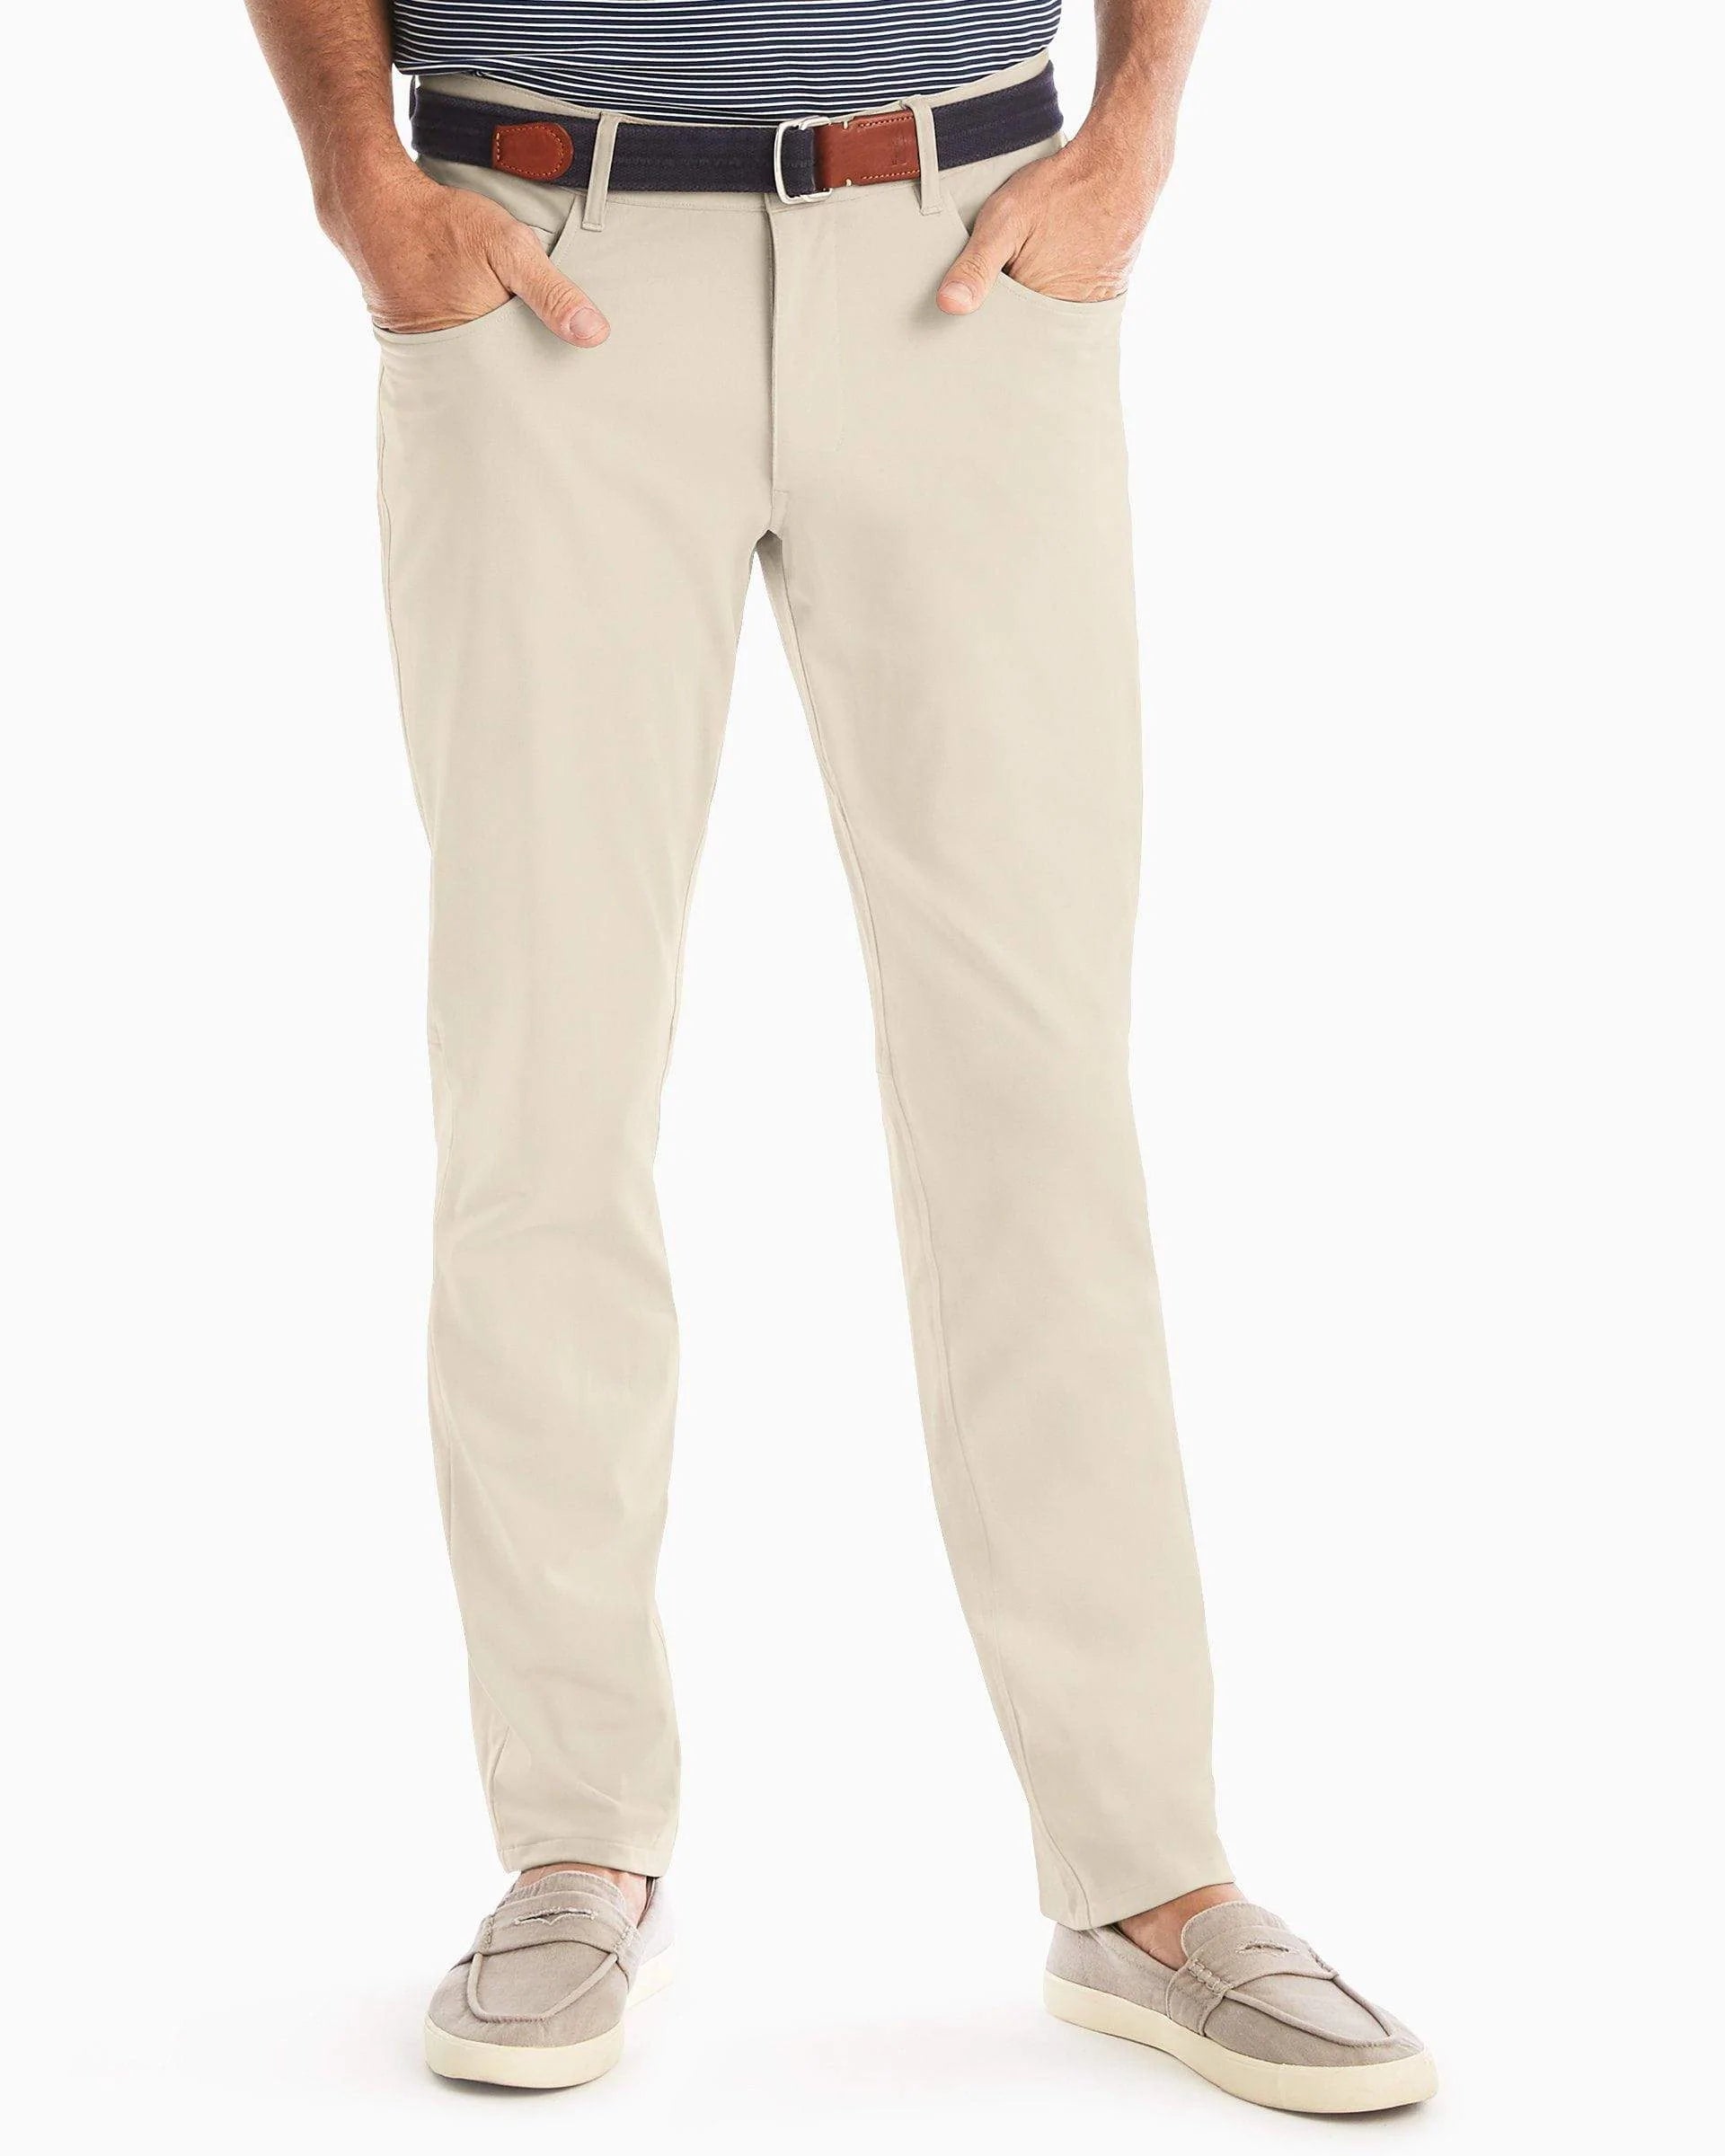 Cross Country Pant- Stone